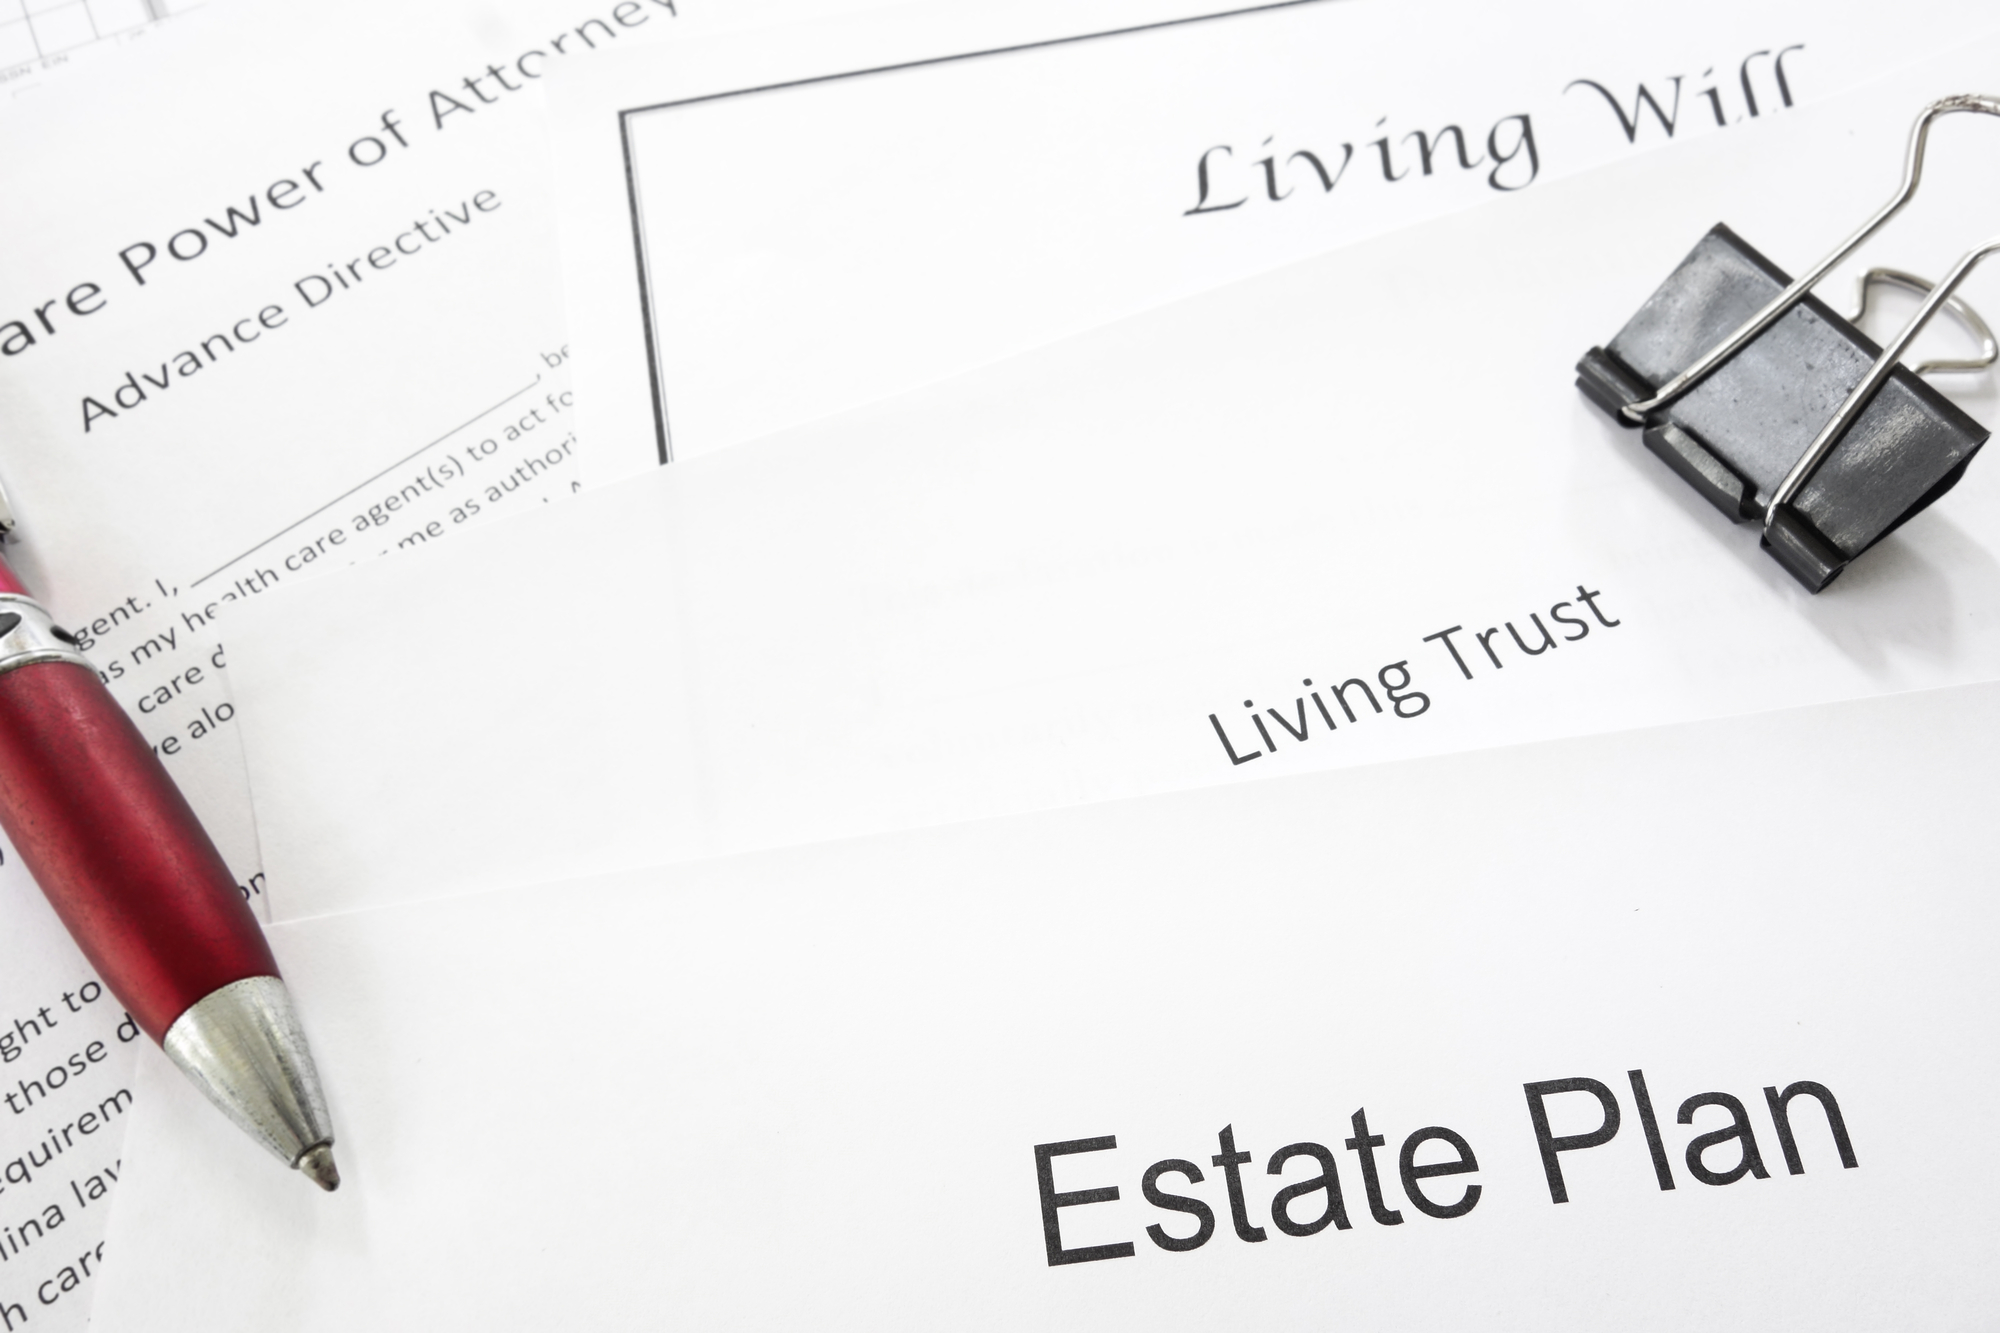 Annual Estate Planning Review